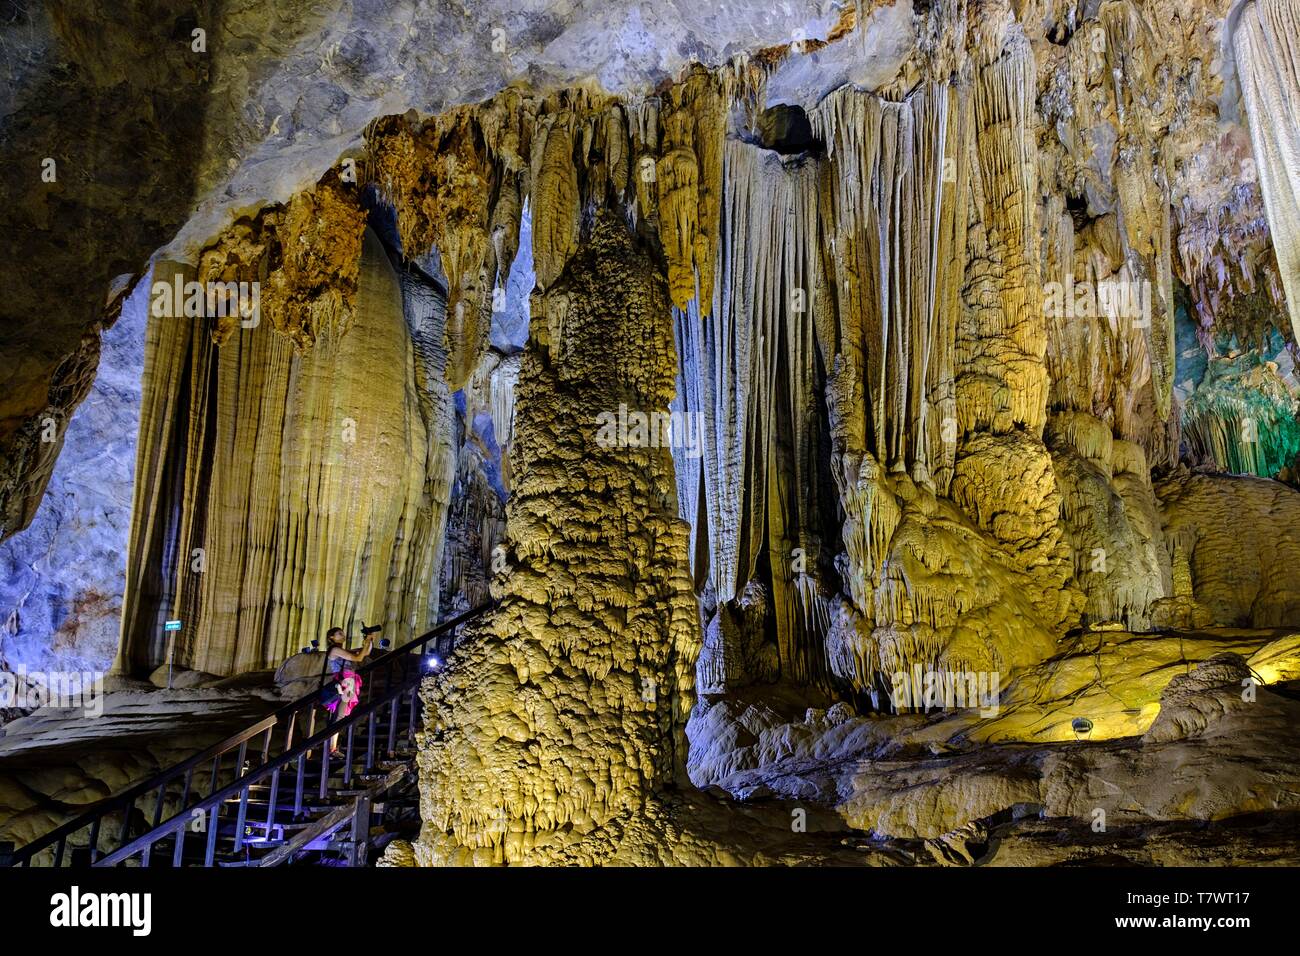 Vietnam, Quang Binh province, National park of Phong Nha-Ke Bang listed as World Heritage by UNESCO, Thien Duong cave or Paradise cave, discovered in 2005 Stock Photo